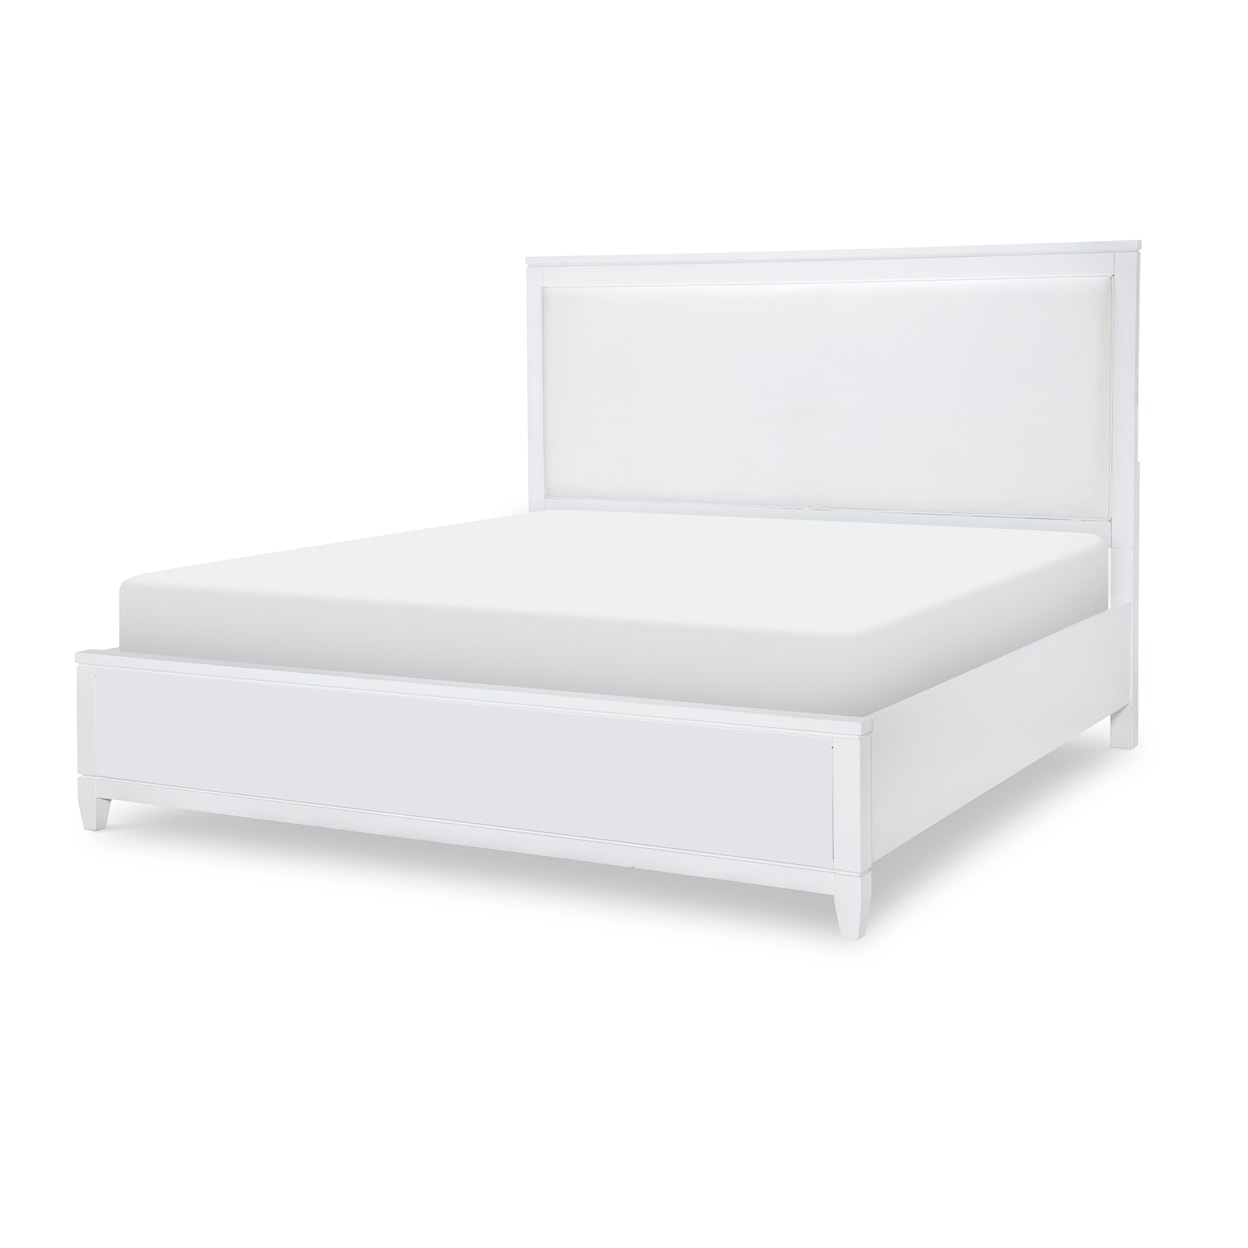 Legacy Classic Summerland California King Upholstered Bed